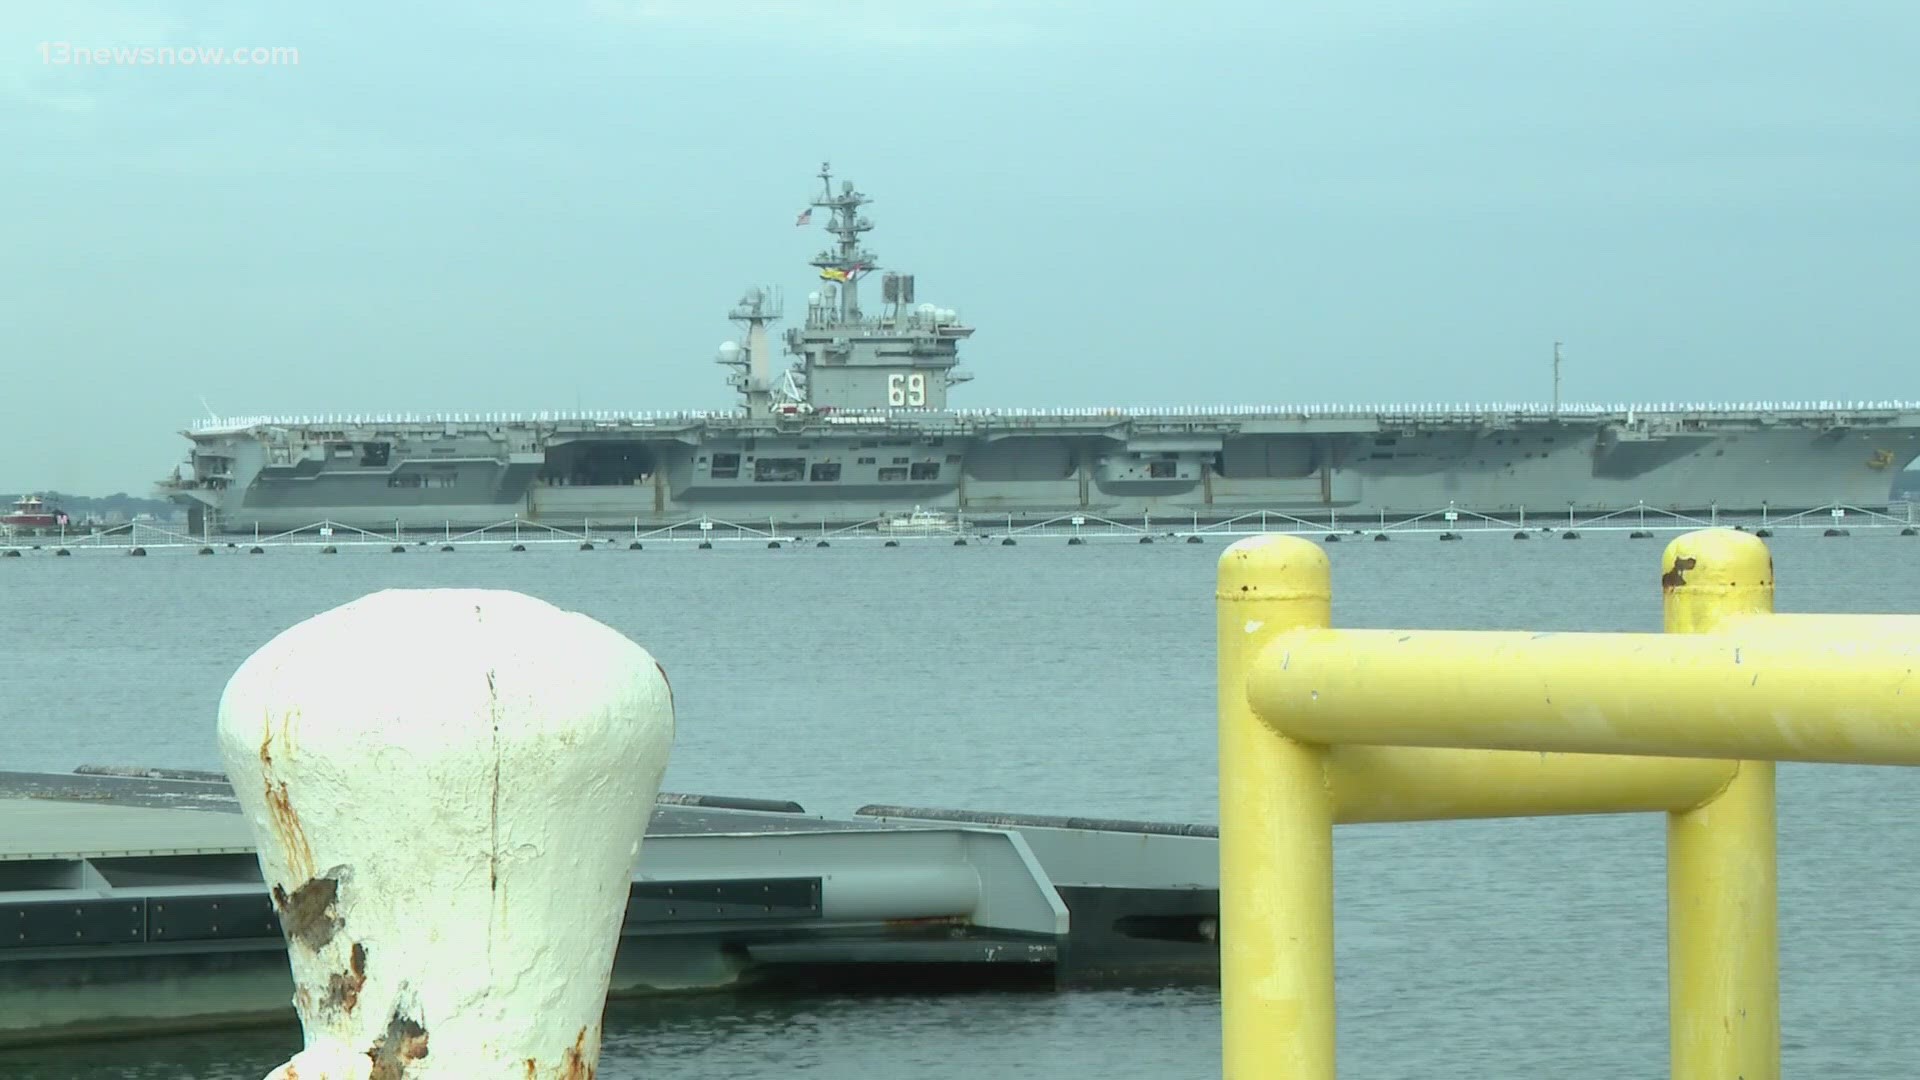 A sailor from the USS Mason went overboard in the Red Sea. Now an investigation is underway to determine what happened.